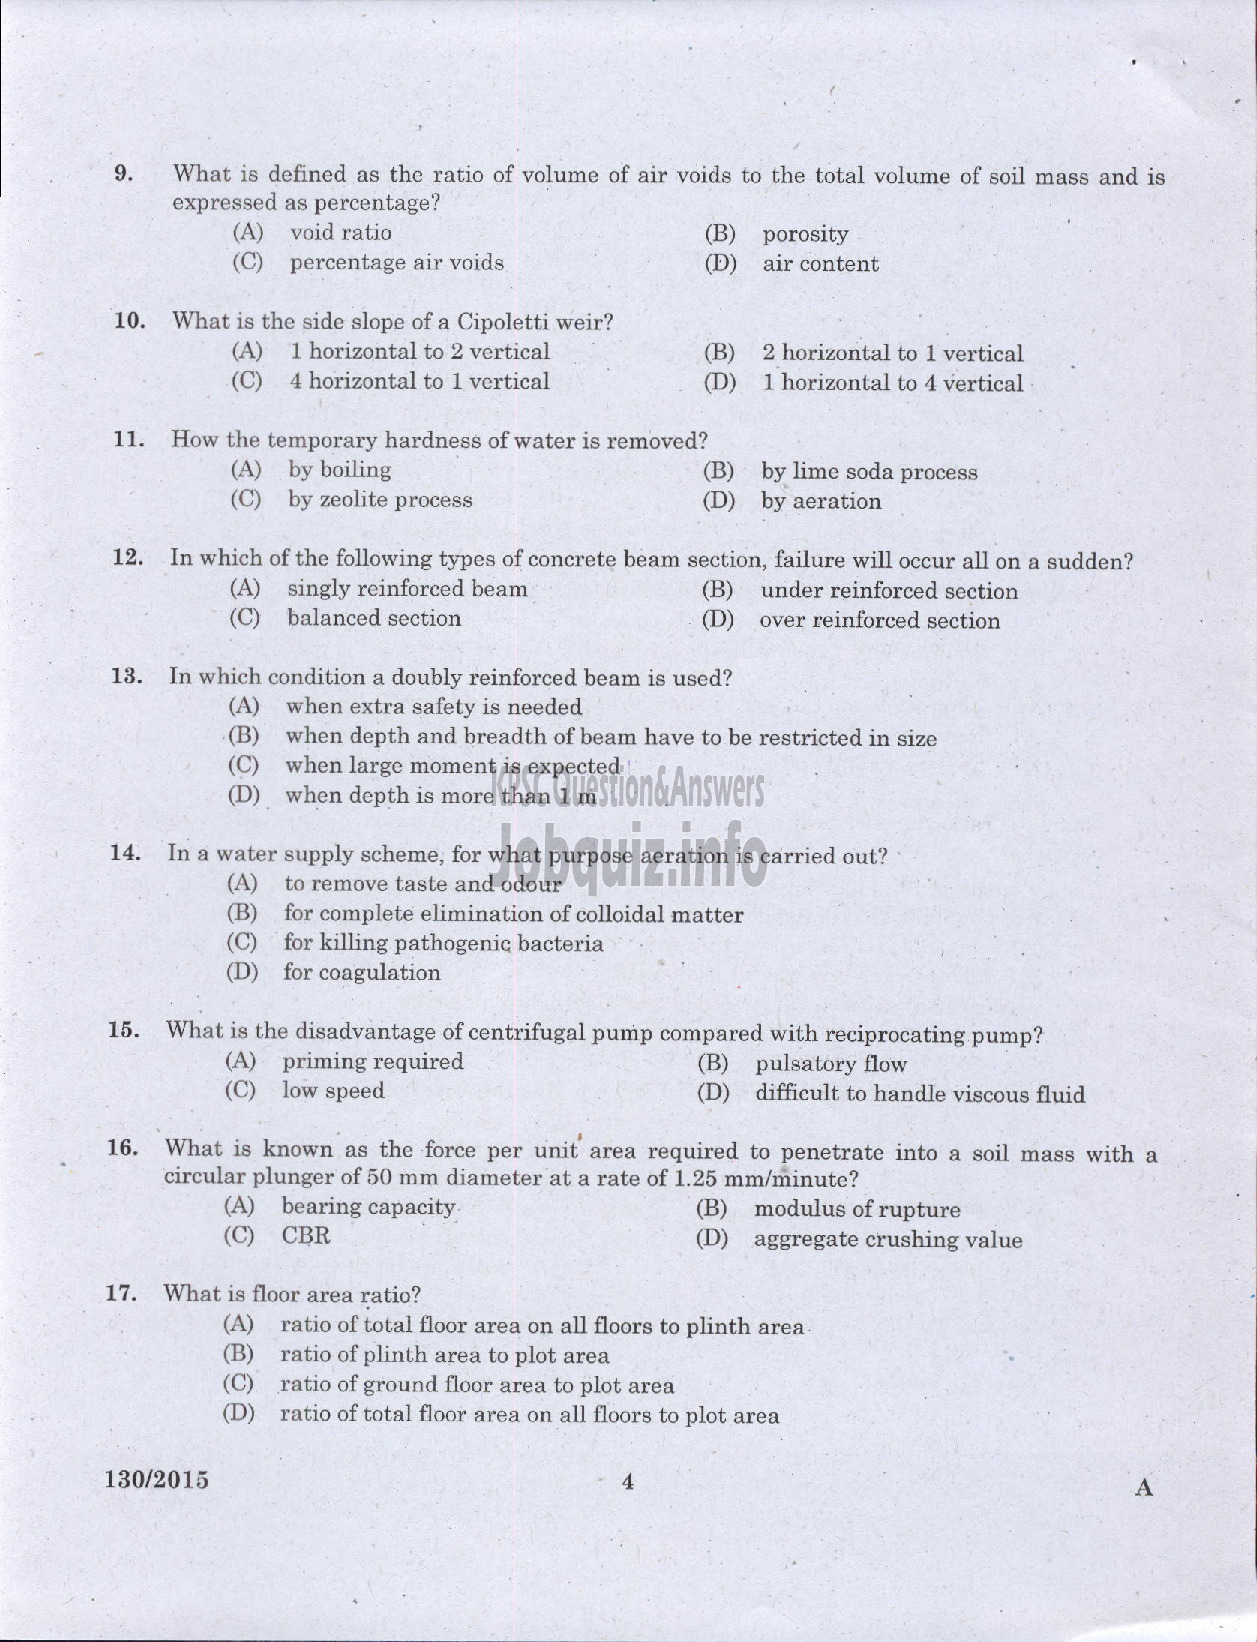 Kerala PSC Question Paper - ASSISTANT ENGINEER CIVIL LOCAL SELF GOVERNMENT/PWD/IRRIGATION-2